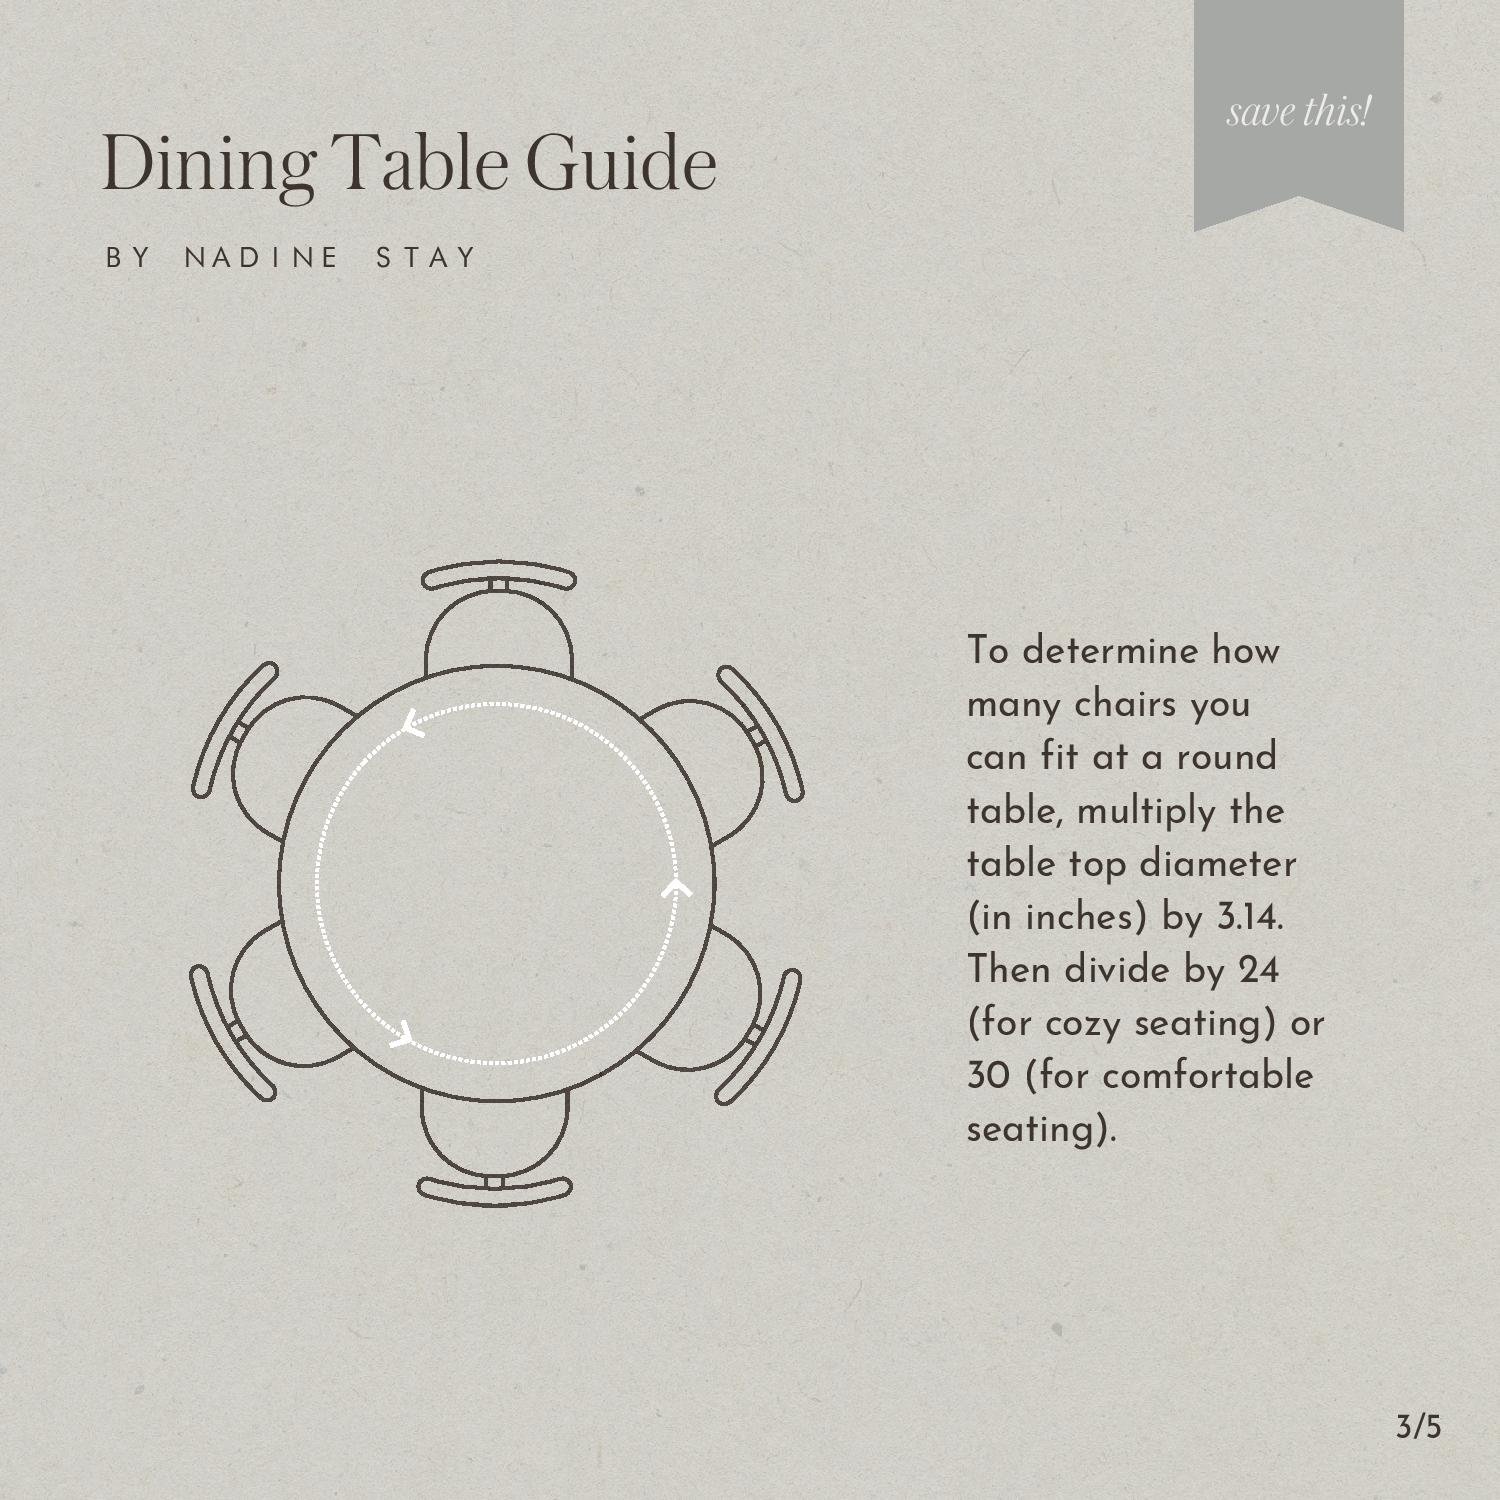 Dining Table Size, Shape, And Seating Guide by Nadine Stay | How to determine what size dining table will fit in your home. How to determine how many chairs fit at a rectangle and round dining table. Dining table shape guidelines.